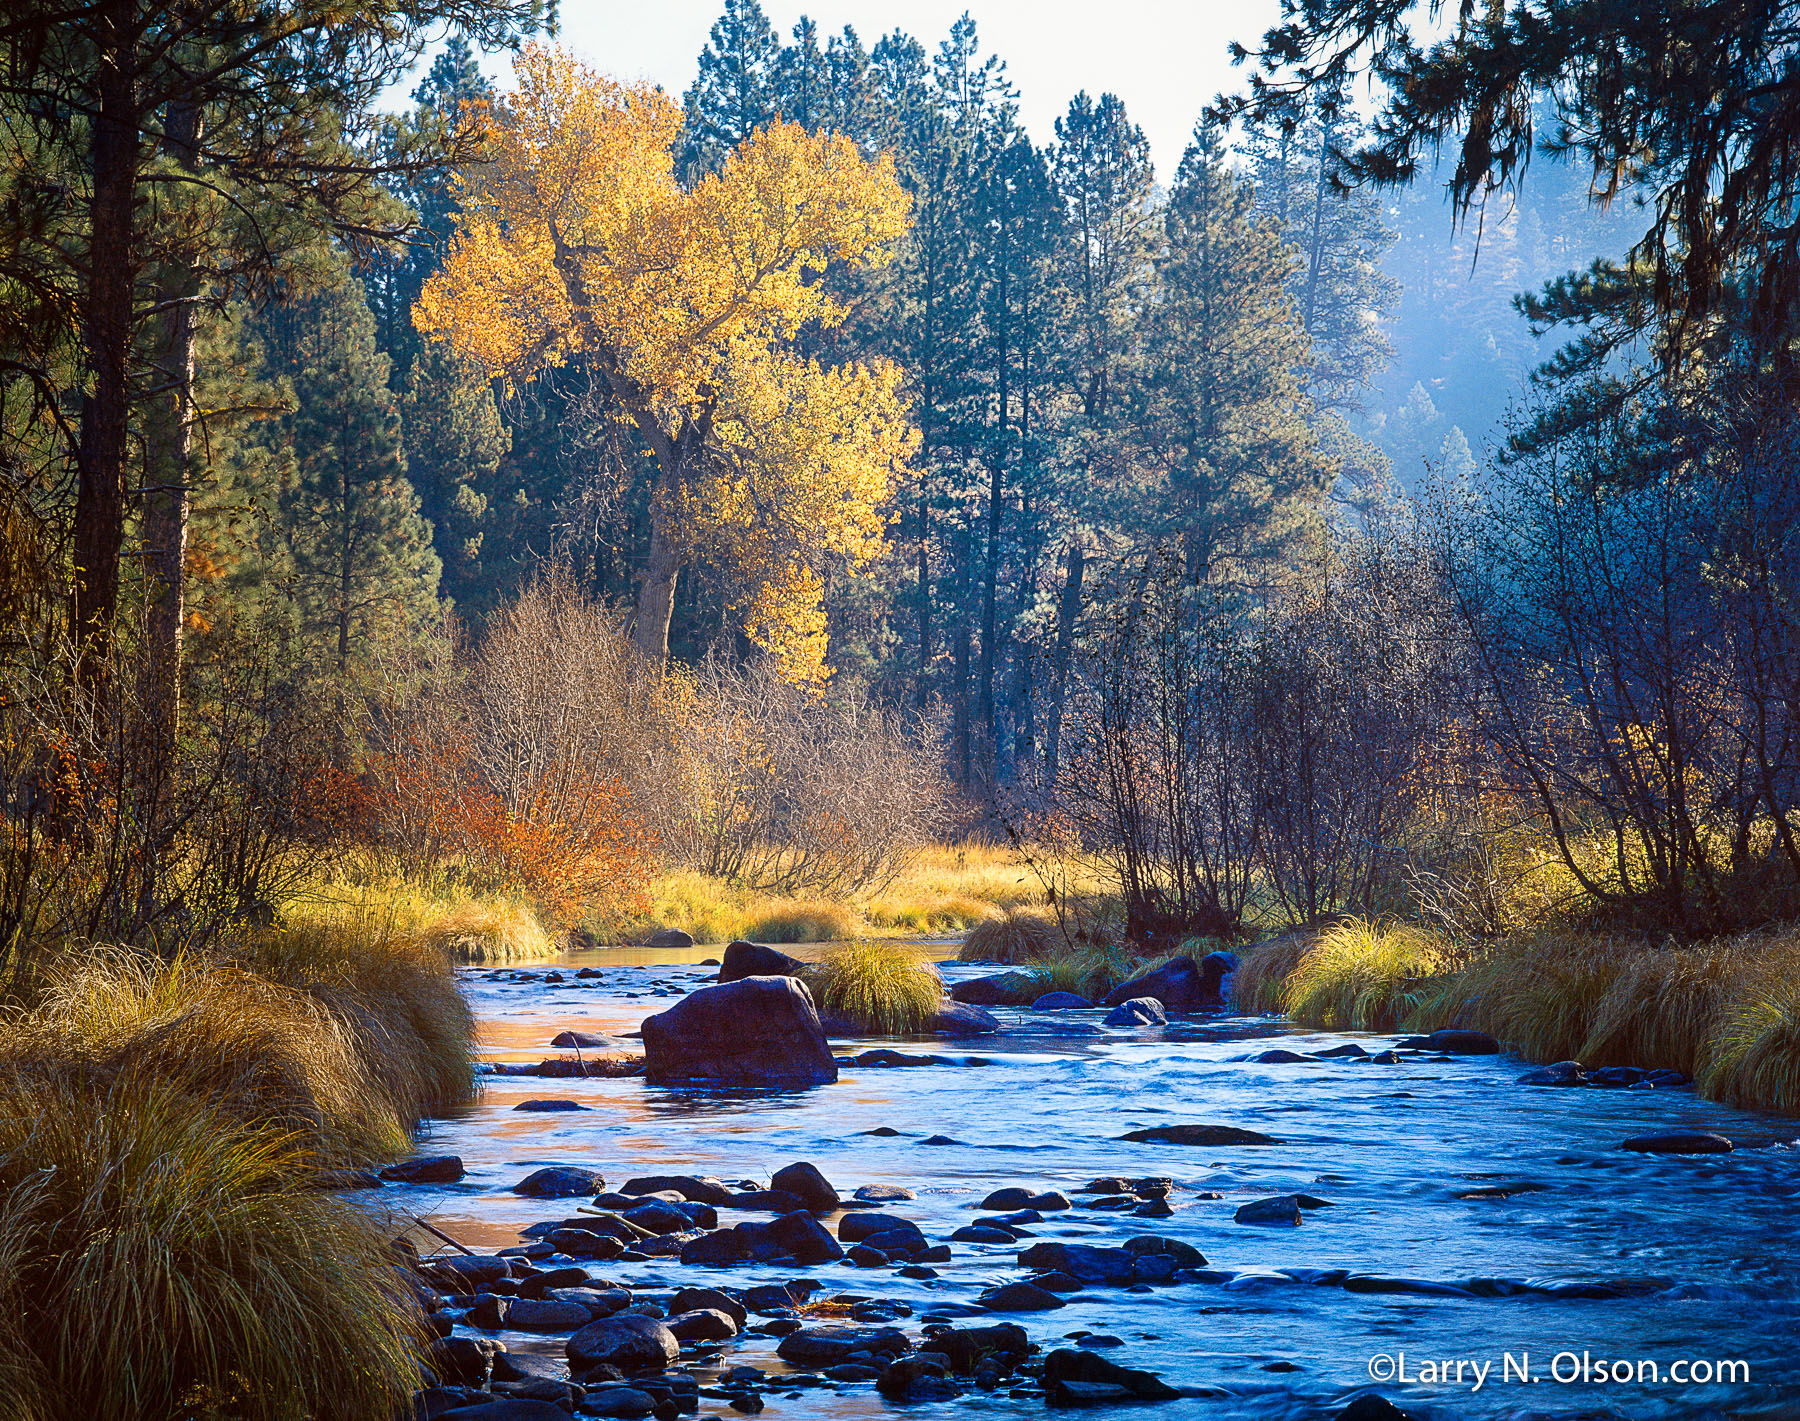 Middle Fork, John Day River, OR | A small river in it's headwaters flows through the autum forest of Cottonwood and Ponderosa Pines.